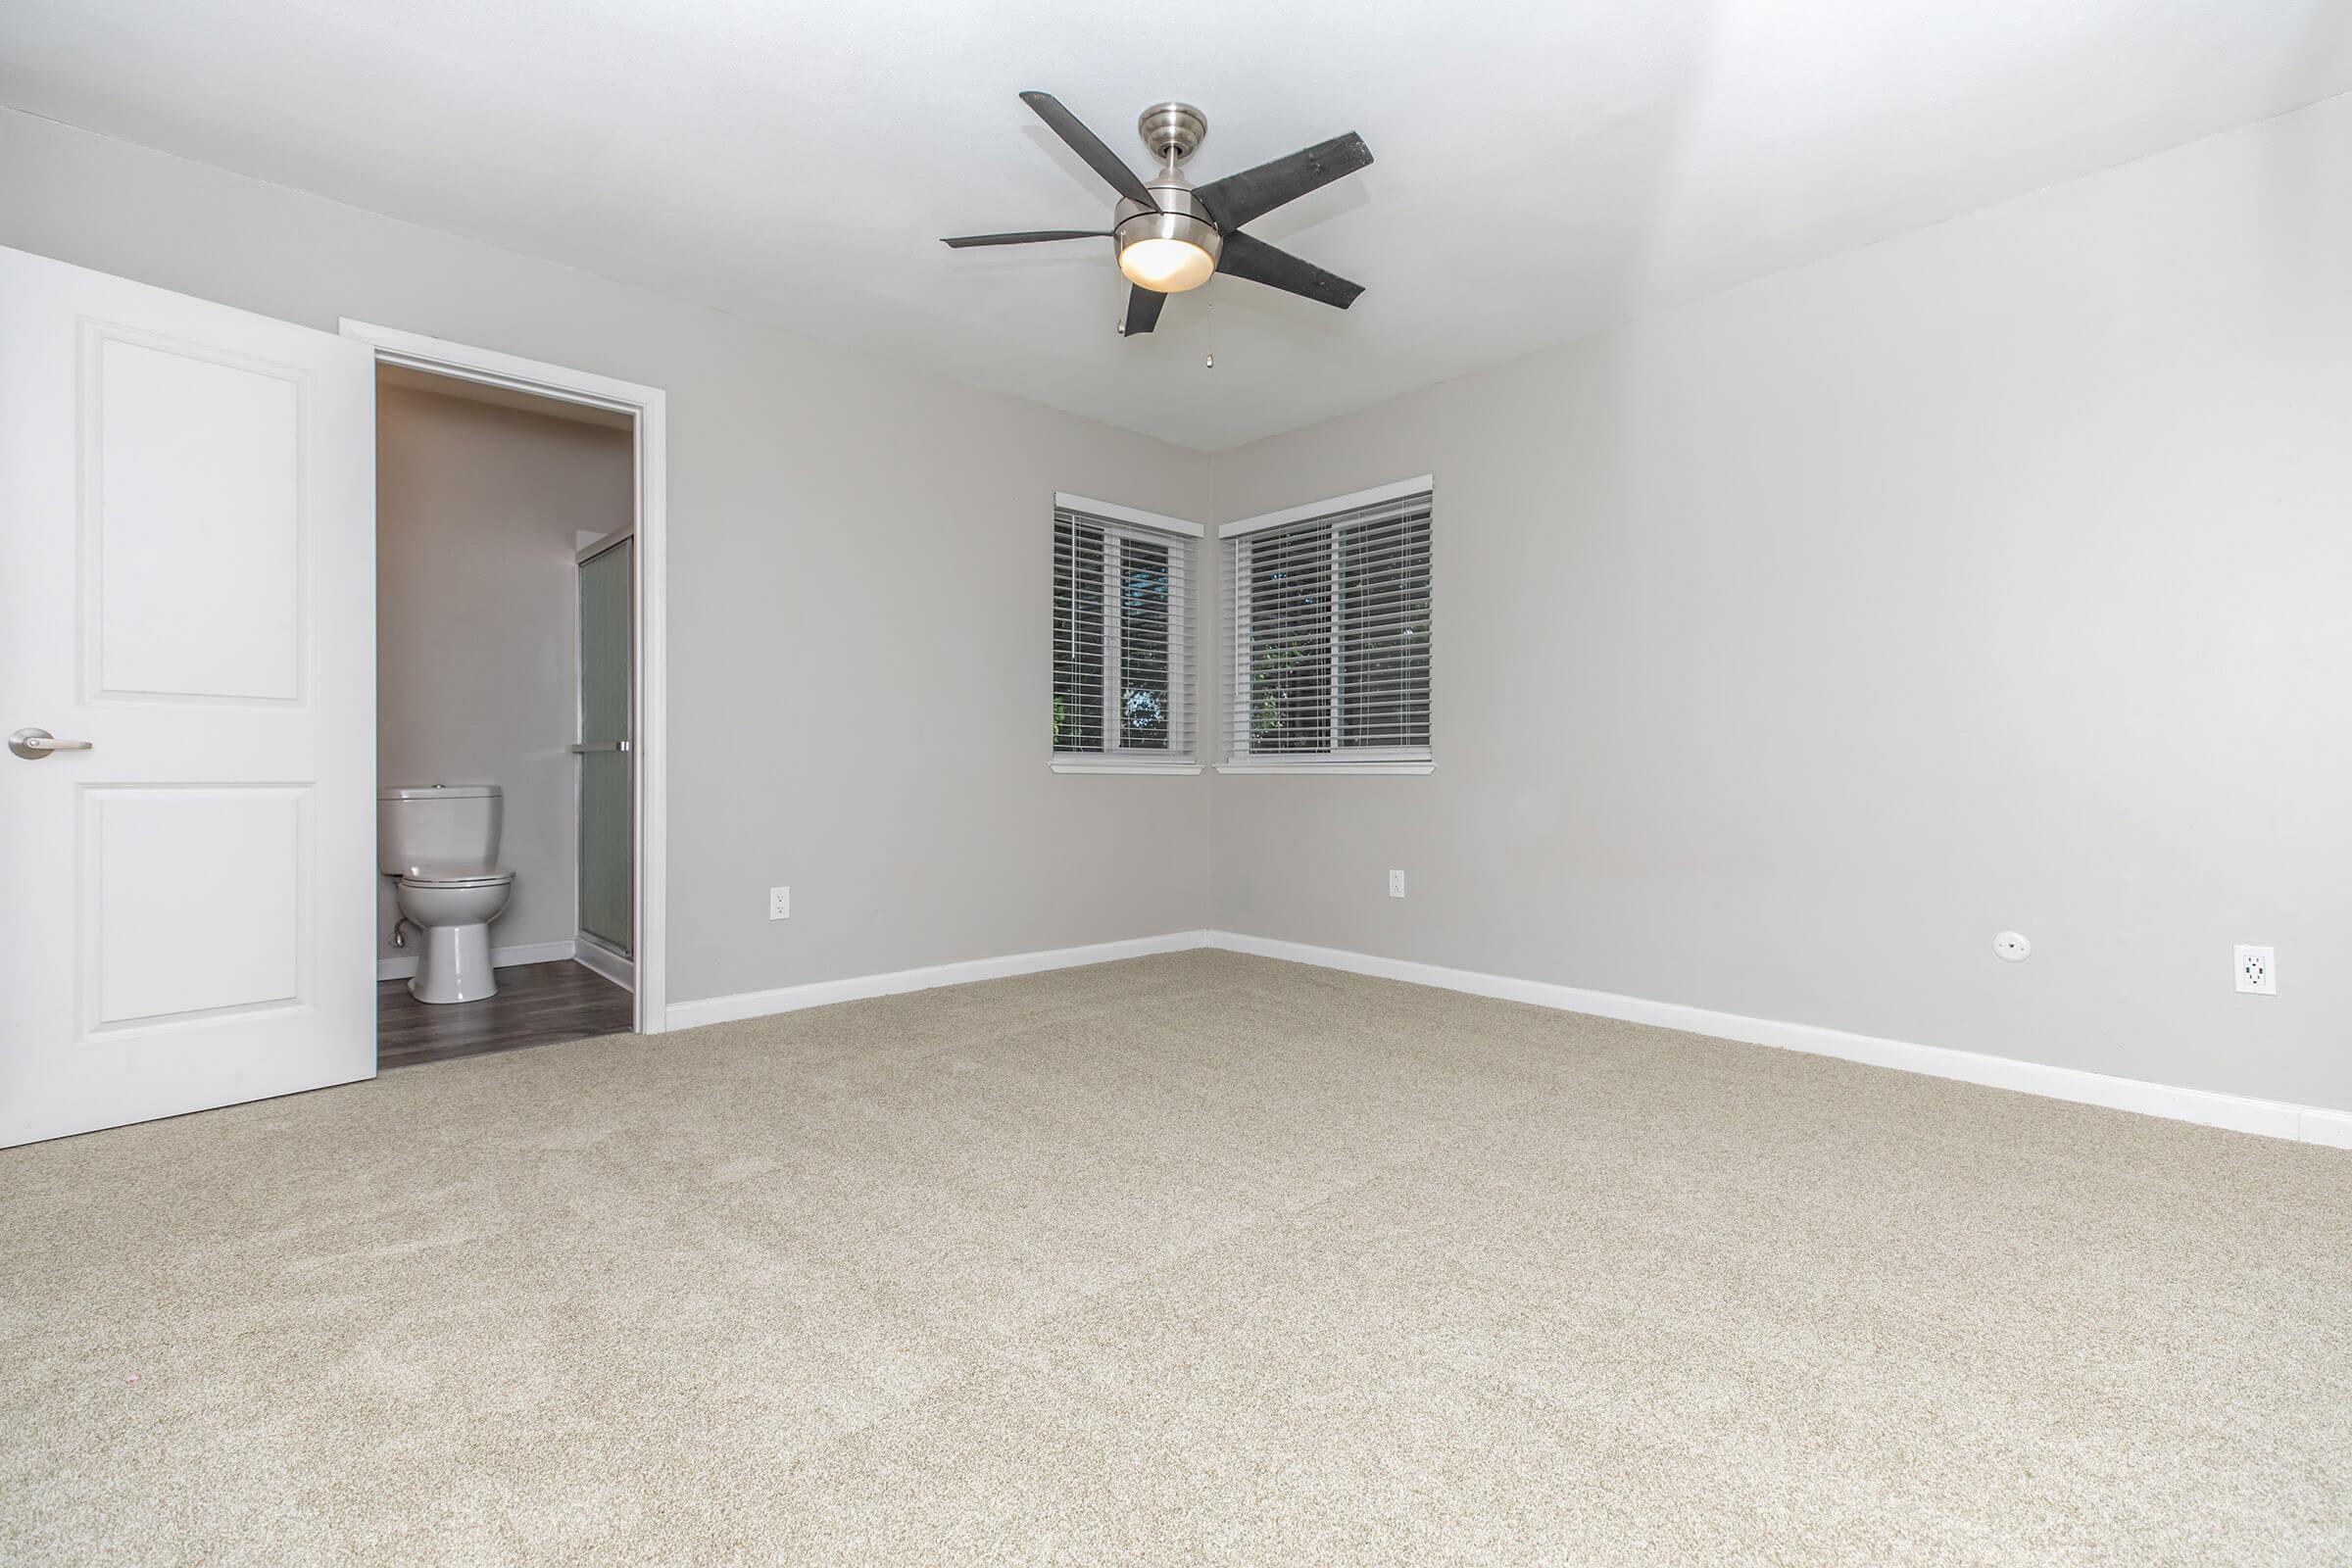 CEILING FANS AND VERTICAL BLINDS IN TOWNHOME FOR RENT